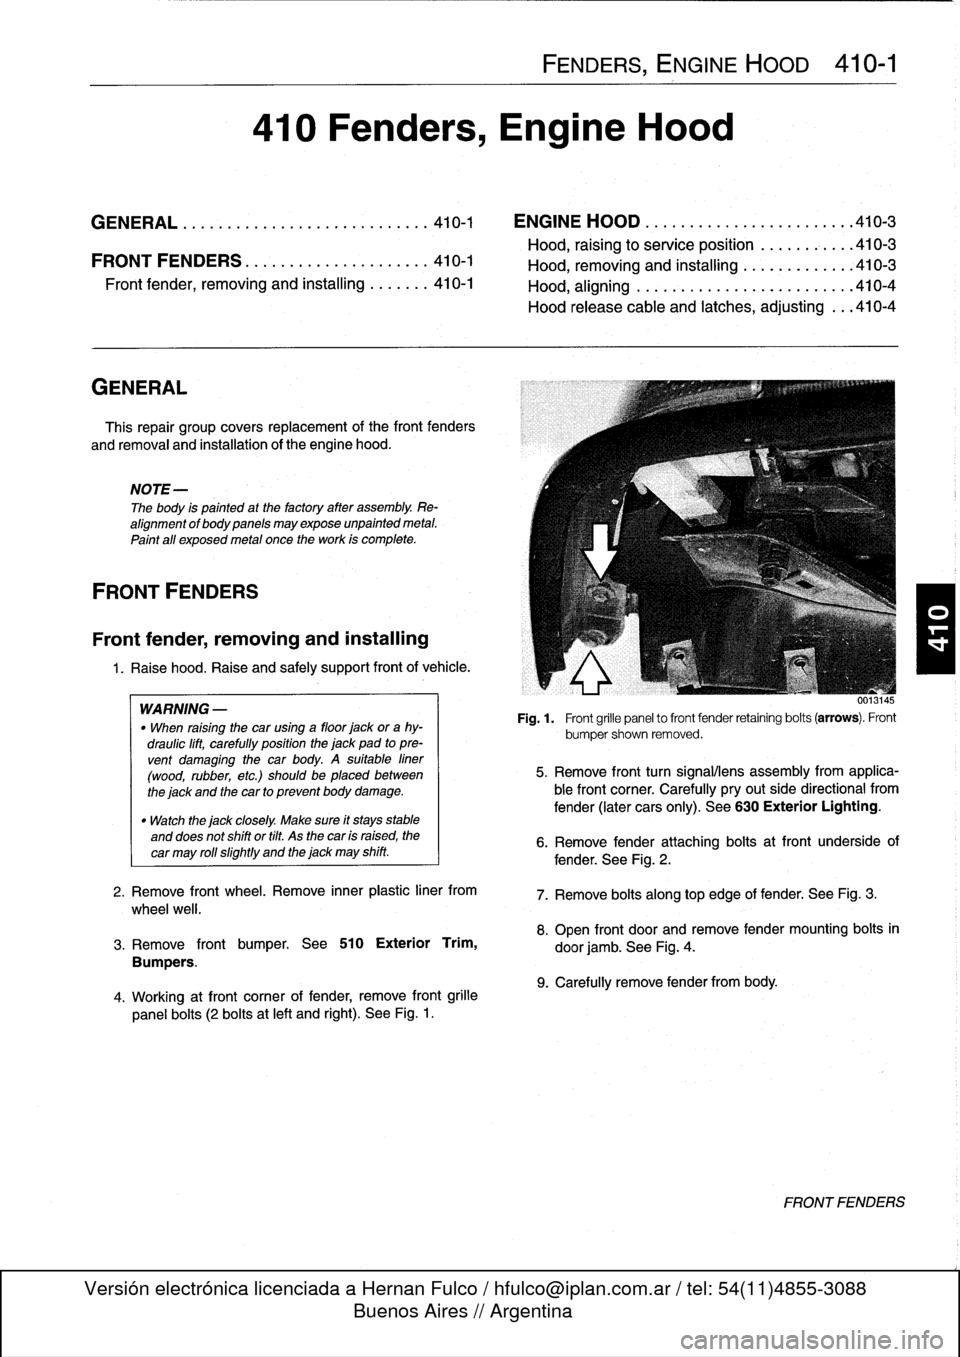 BMW 328i 1995 E36 Workshop Manual 
GENERAL

This
repair
group
covers
replacement
of
the
front
fenders

and
removal
and
installation
of
the
engine
hood
.

NOTE-

The
body
is
painted
at
the
factoryafter
assembly
.
Re-
alignment
of
body
